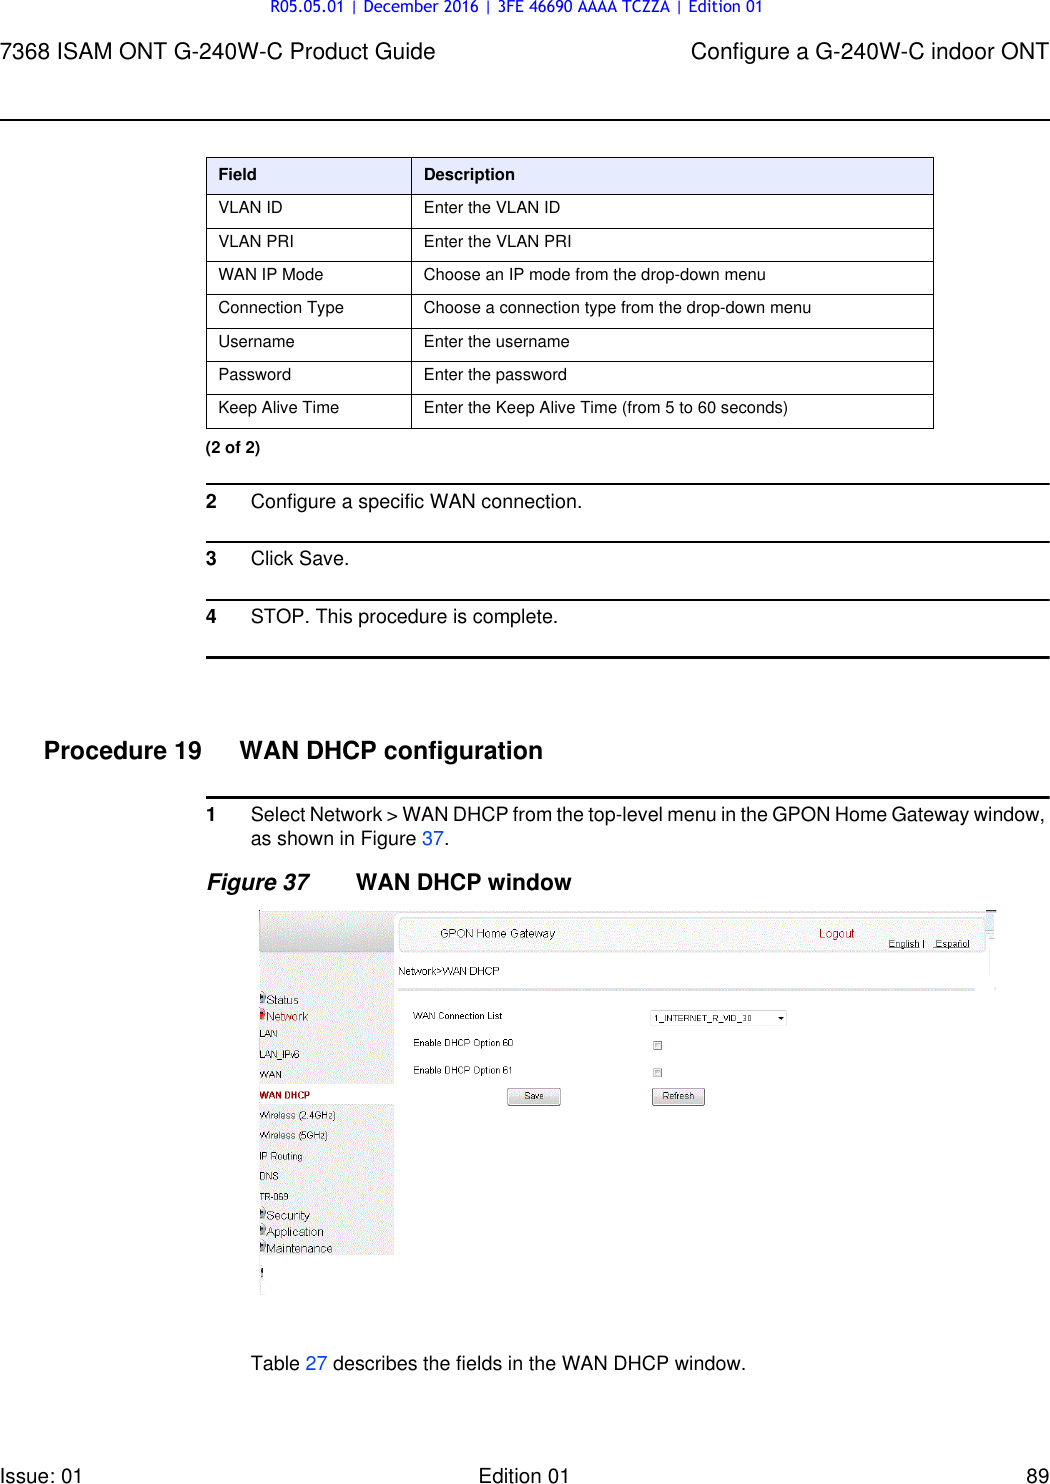 Page 89 of Nokia Bell G240W-C GPON ONU User Manual 7368 ISAM ONT G 240W B Product Guide